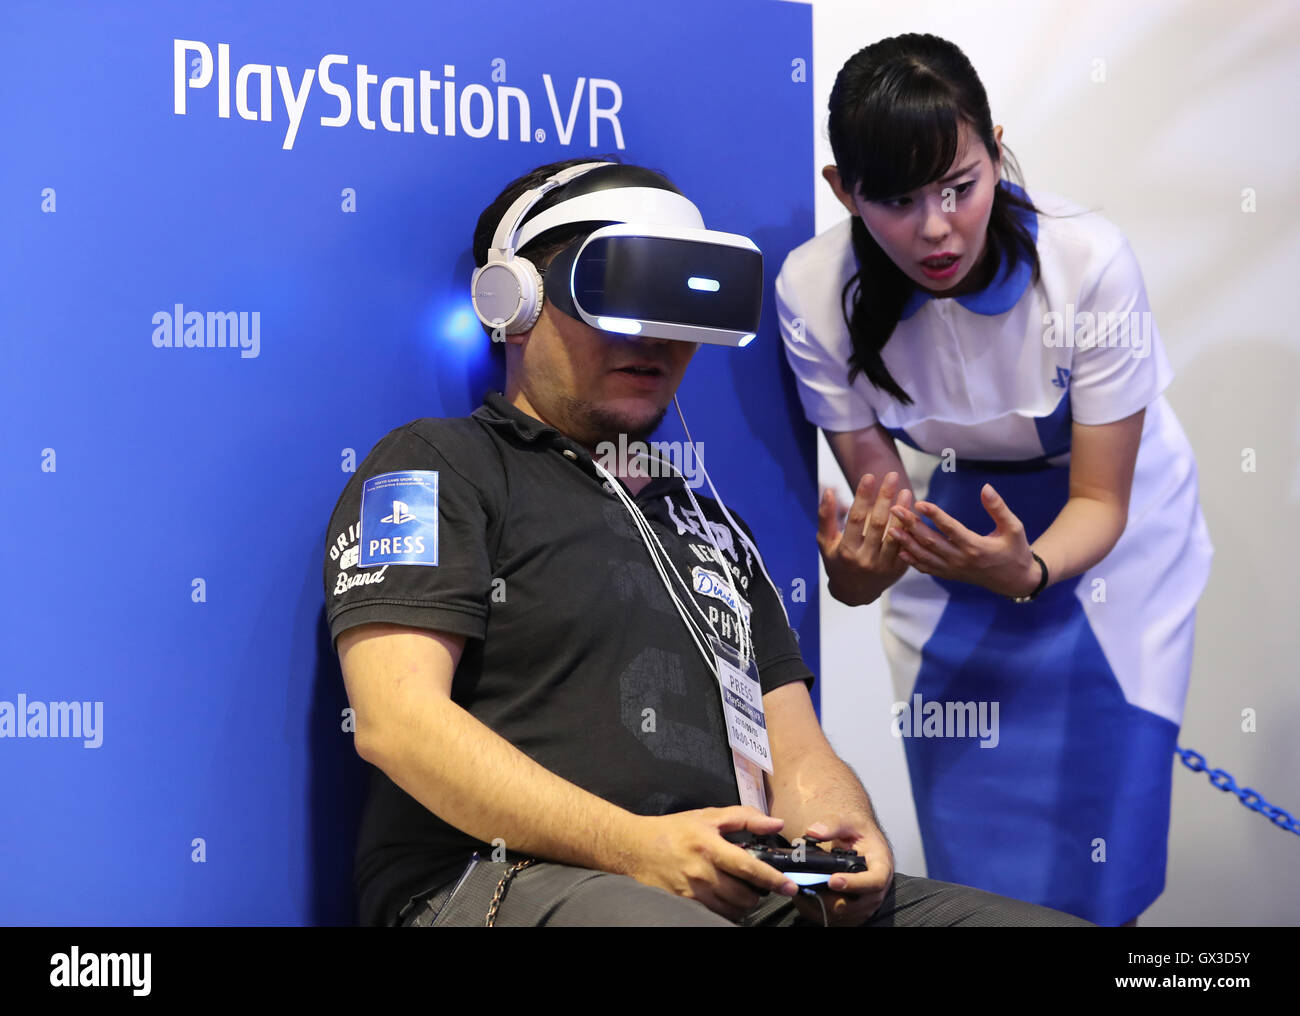 Thursday. 15th Sep, 2016. A visitor tries to play a virtual videogame with Sony Interactive Entertainment's PlayStation VR at the annual Tokyo Game Show in Chiba, suburban Tokyo on Thursday, September 15, 2016. The 20th anniversary Show includes show a new Virtual Reality (VR) area. The event hosts 614 exhibitors from 37 different countries and runs from September 15 to 18 at the International Convention Complex Makuhari Messe in Chiba. 1,523 game titles for smartphones, games consoles, PC and VR platforms are on show. Credit:  Yoshio Tsunoda/AFLO/Alamy Live News Stock Photo